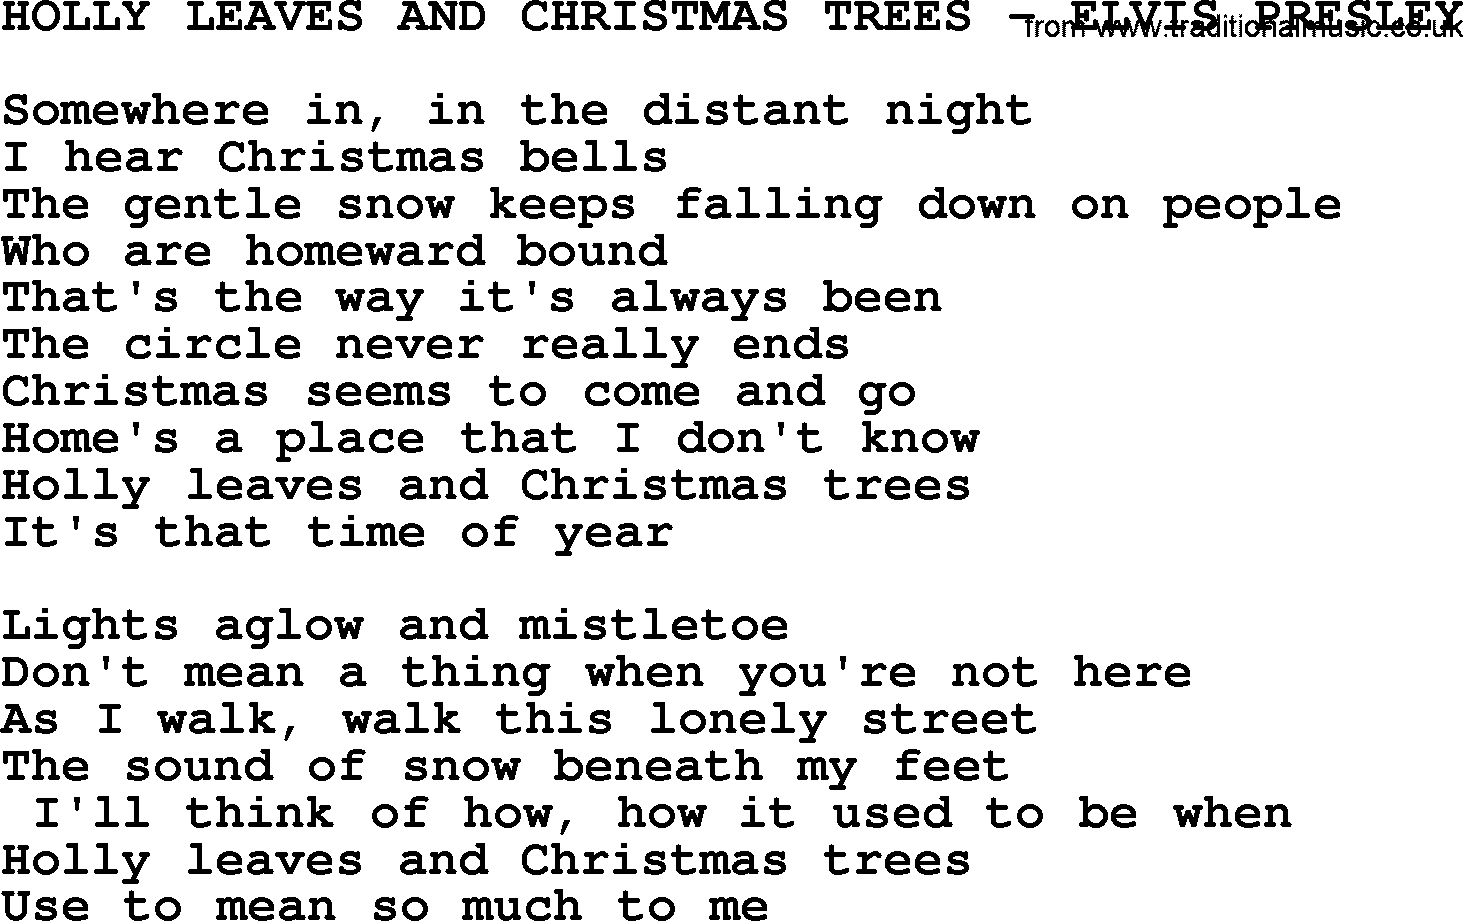 Elvis Presley song: Holly Leaves And Christmas Trees-Elvis Presley-.txt lyrics and chords